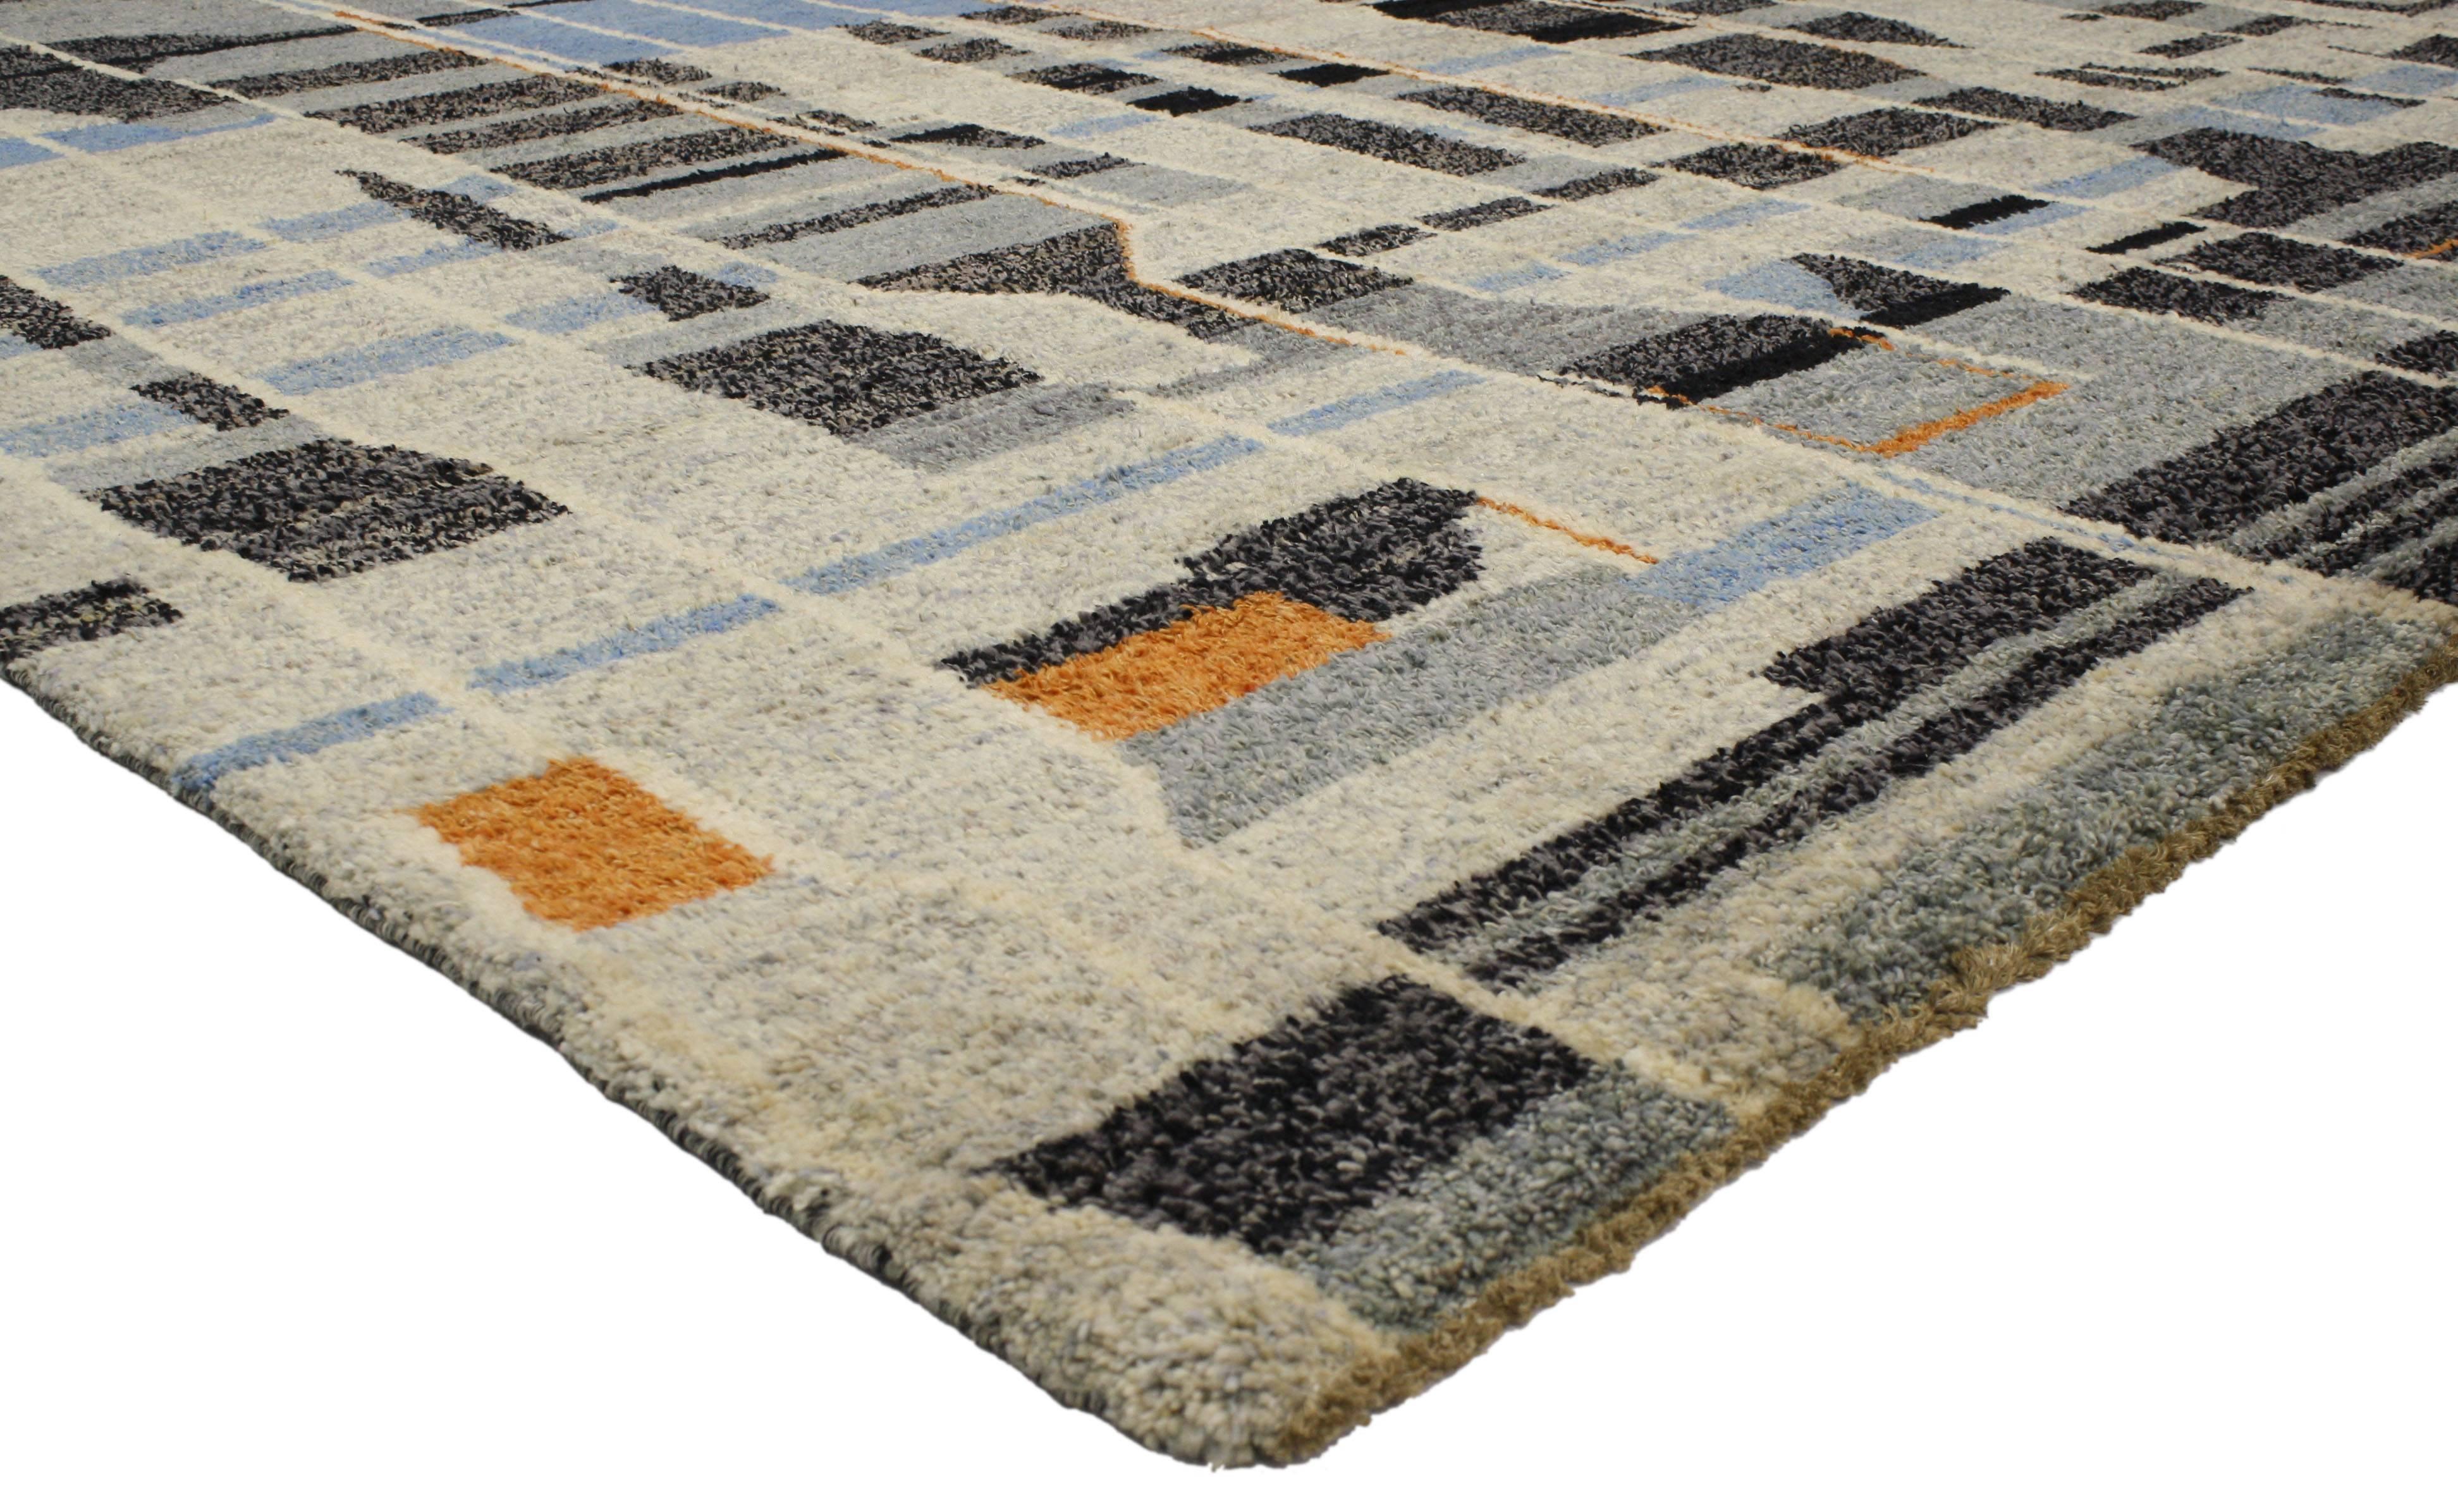 Highly stylish yet casually elegant, this contemporary Moroccan rug with modern design is ideal for nearly any fashionable space. A series of asymmetrical lines and color blocks create a mesmerizing optical effect over the entire composition. This